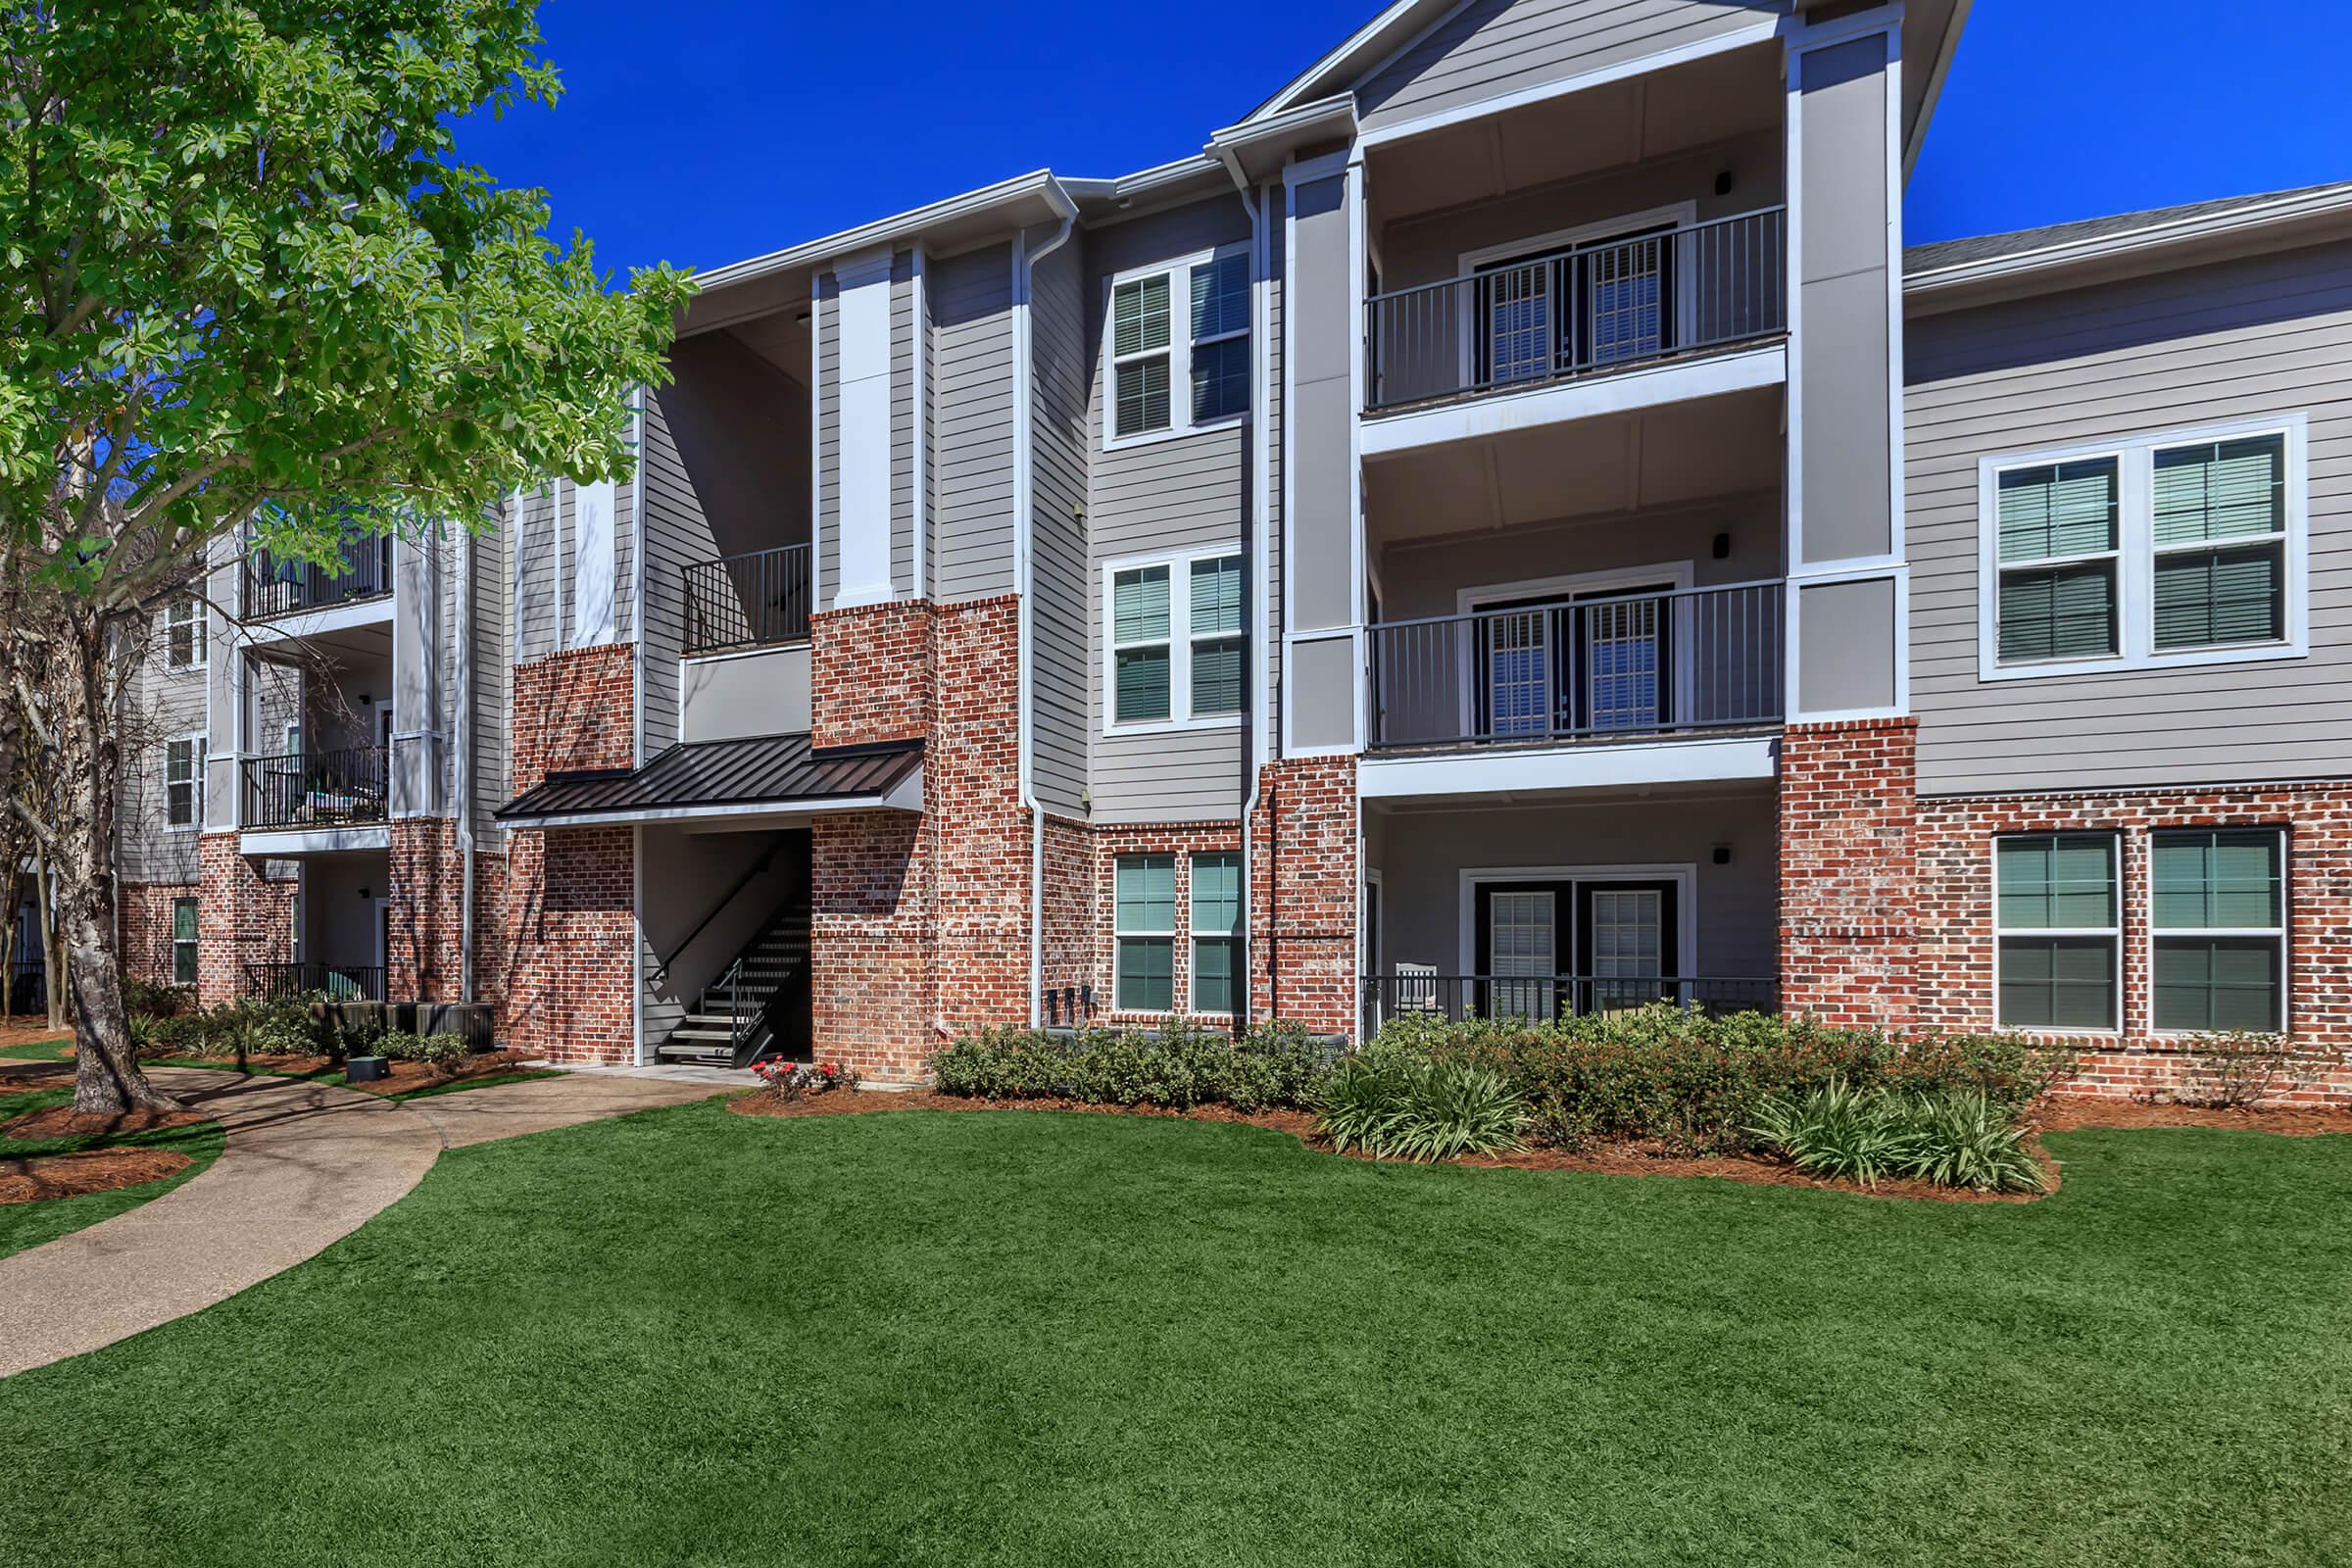 WELCOME HOME TO ARBOR TRACE AT LYNN HAVEN